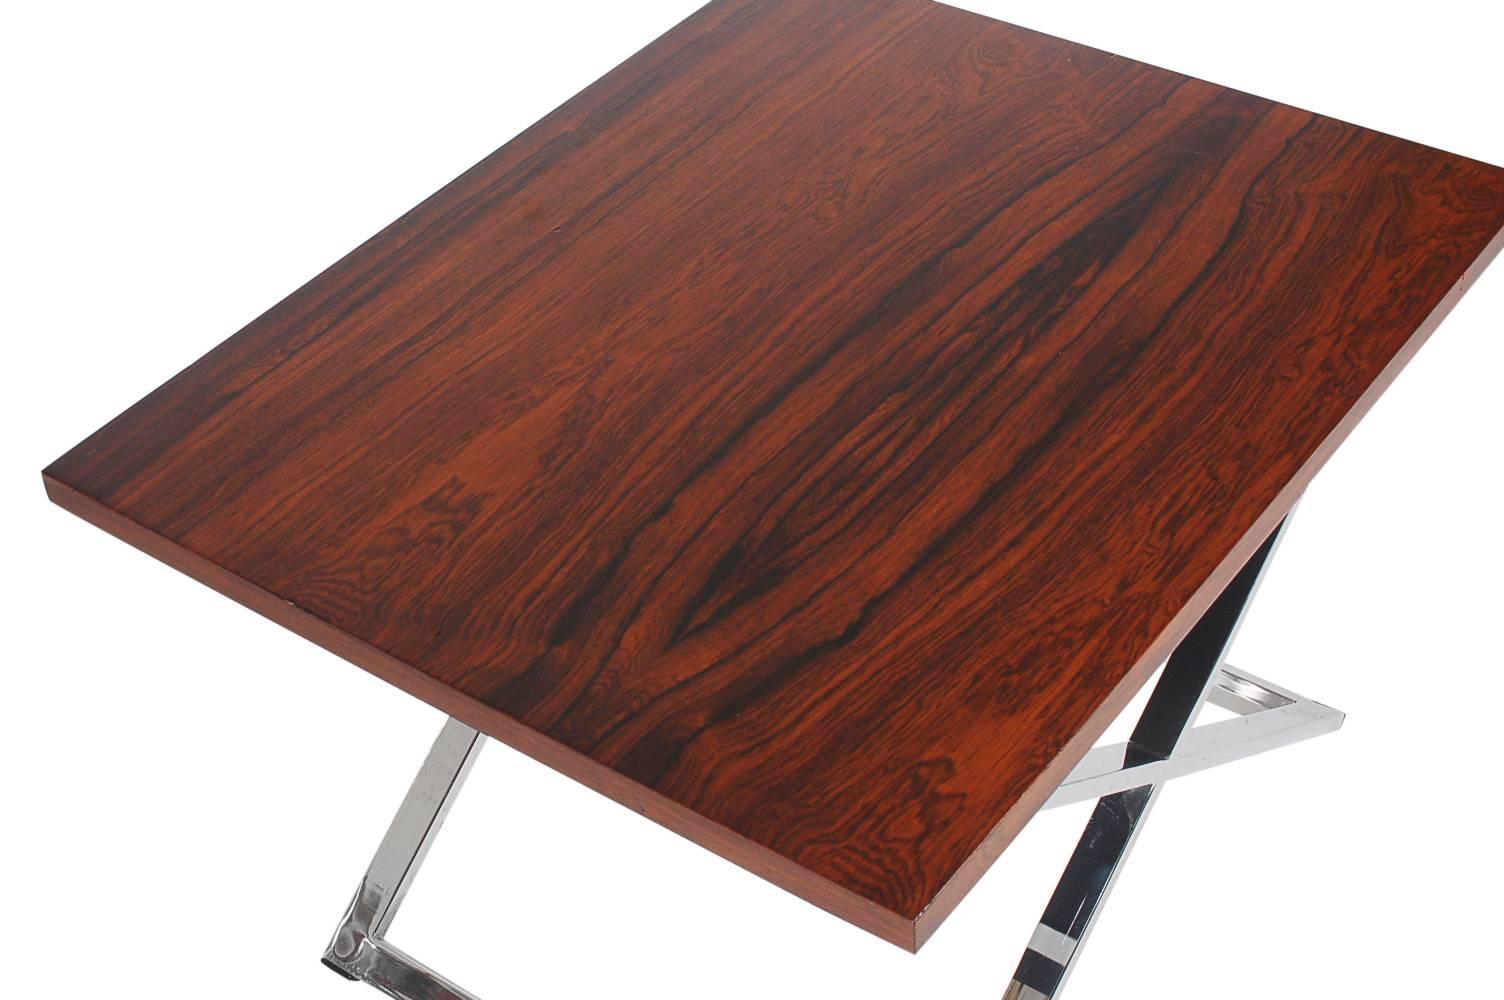 American Mid-Century Modern Rosewood and Chrome Table Set Attributed to Milo Baughman